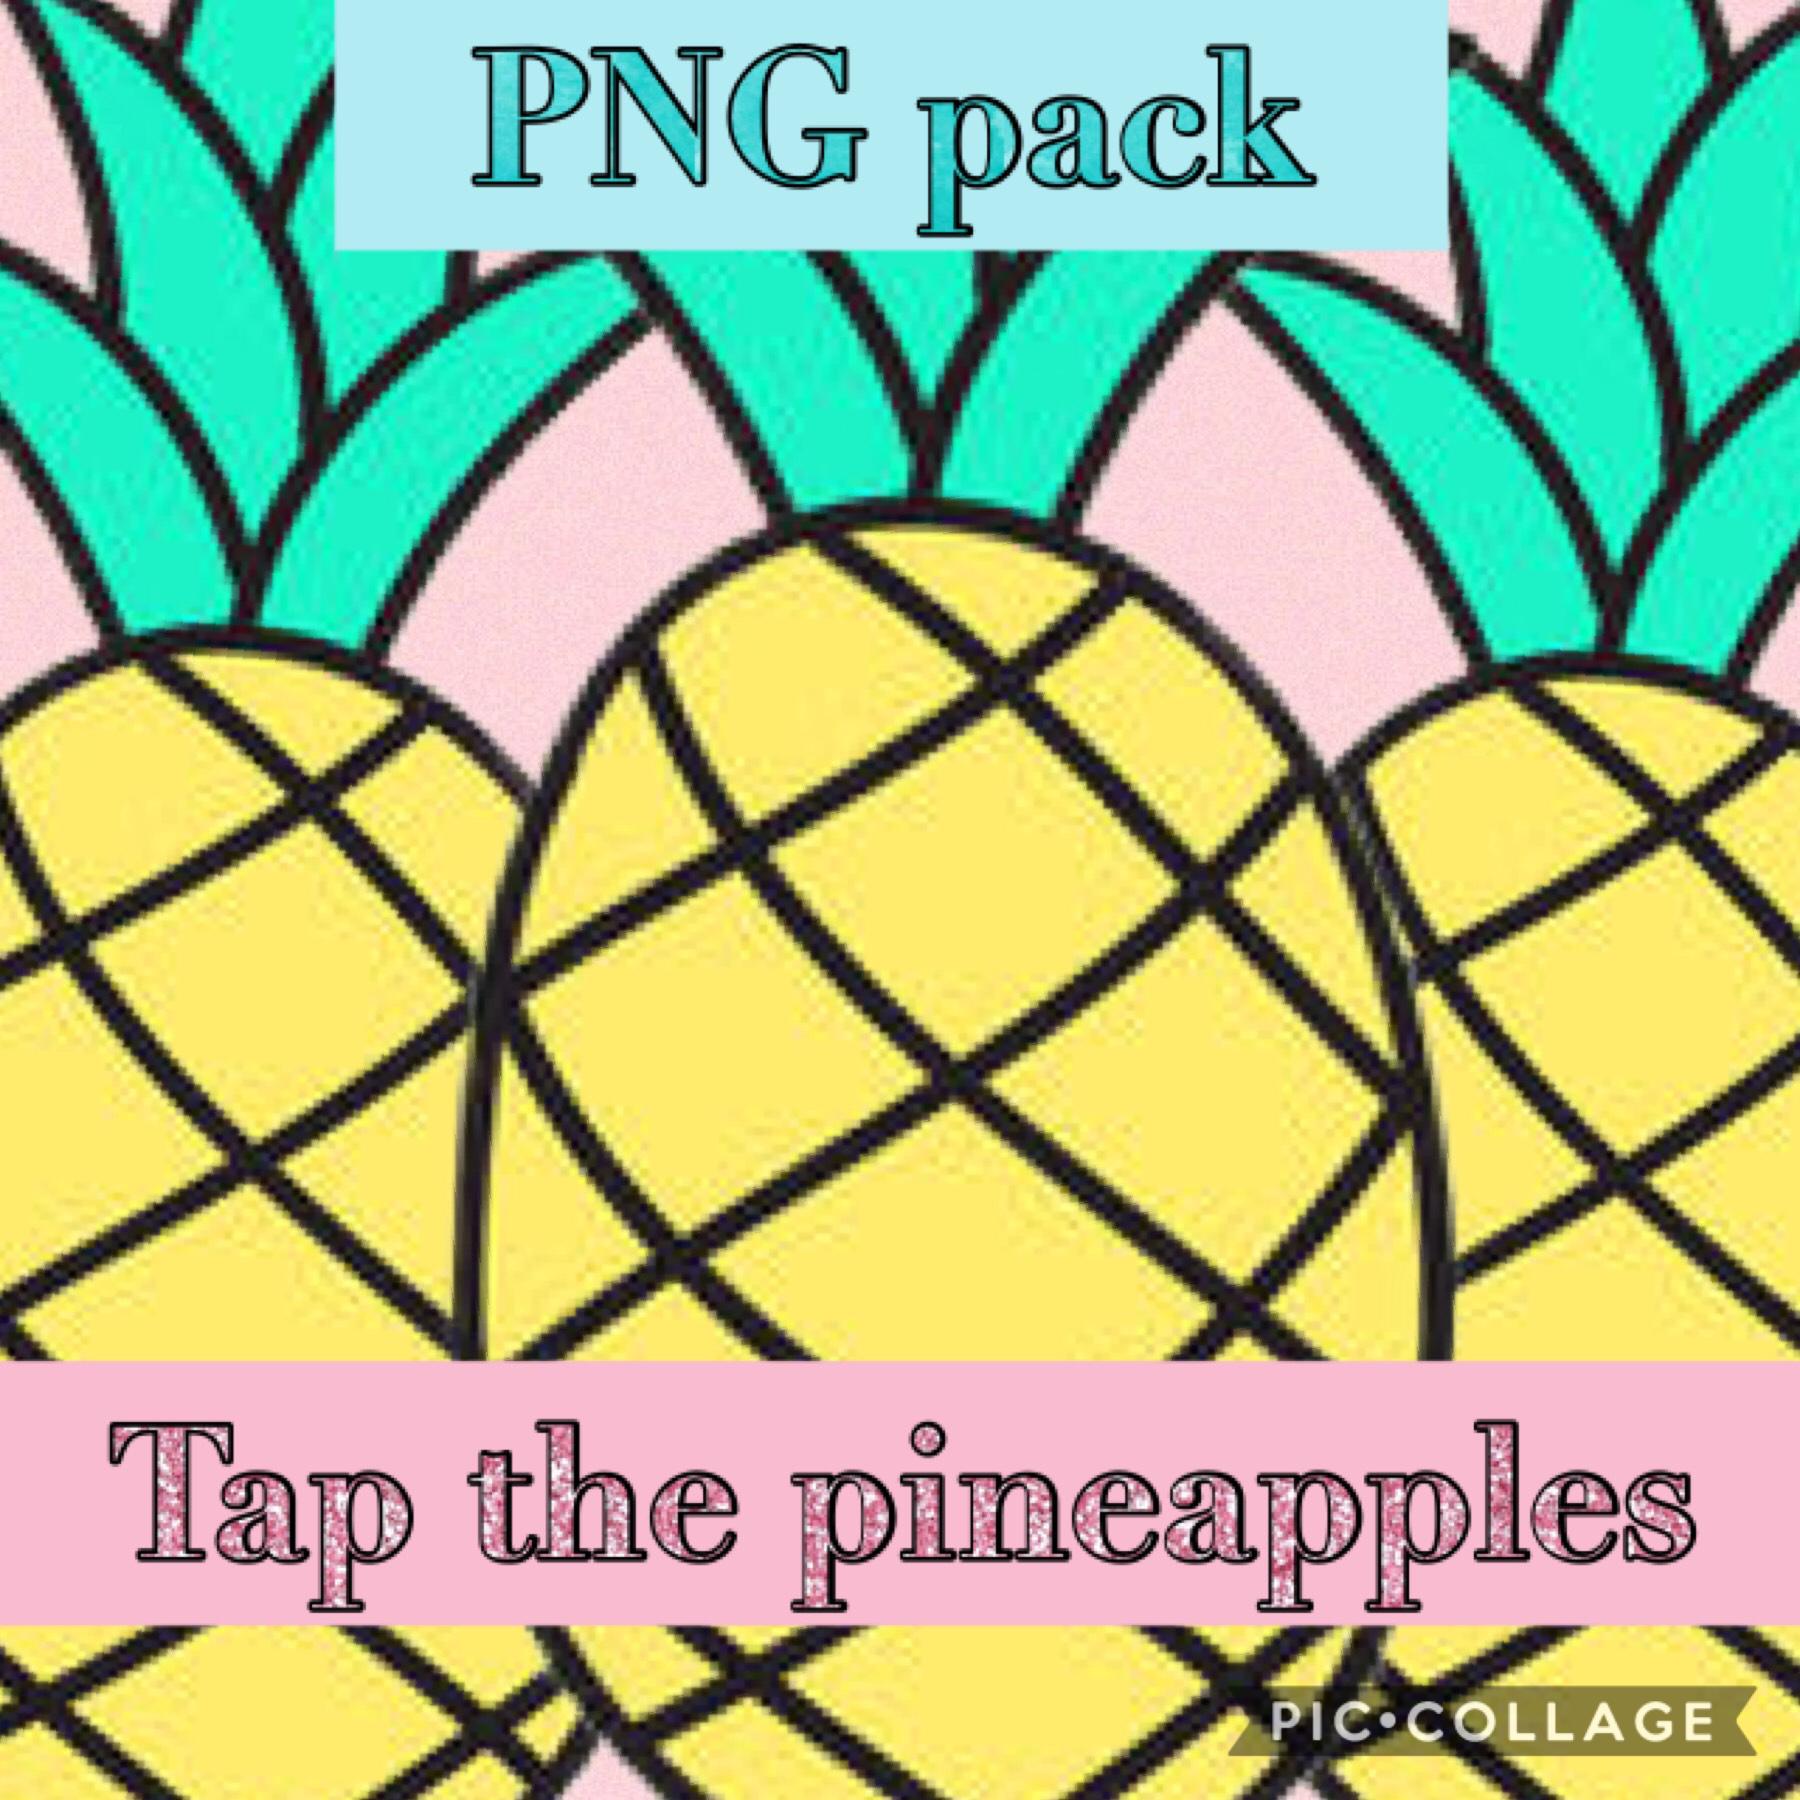 I thought I’d do this for fun! Tap the 🍍 